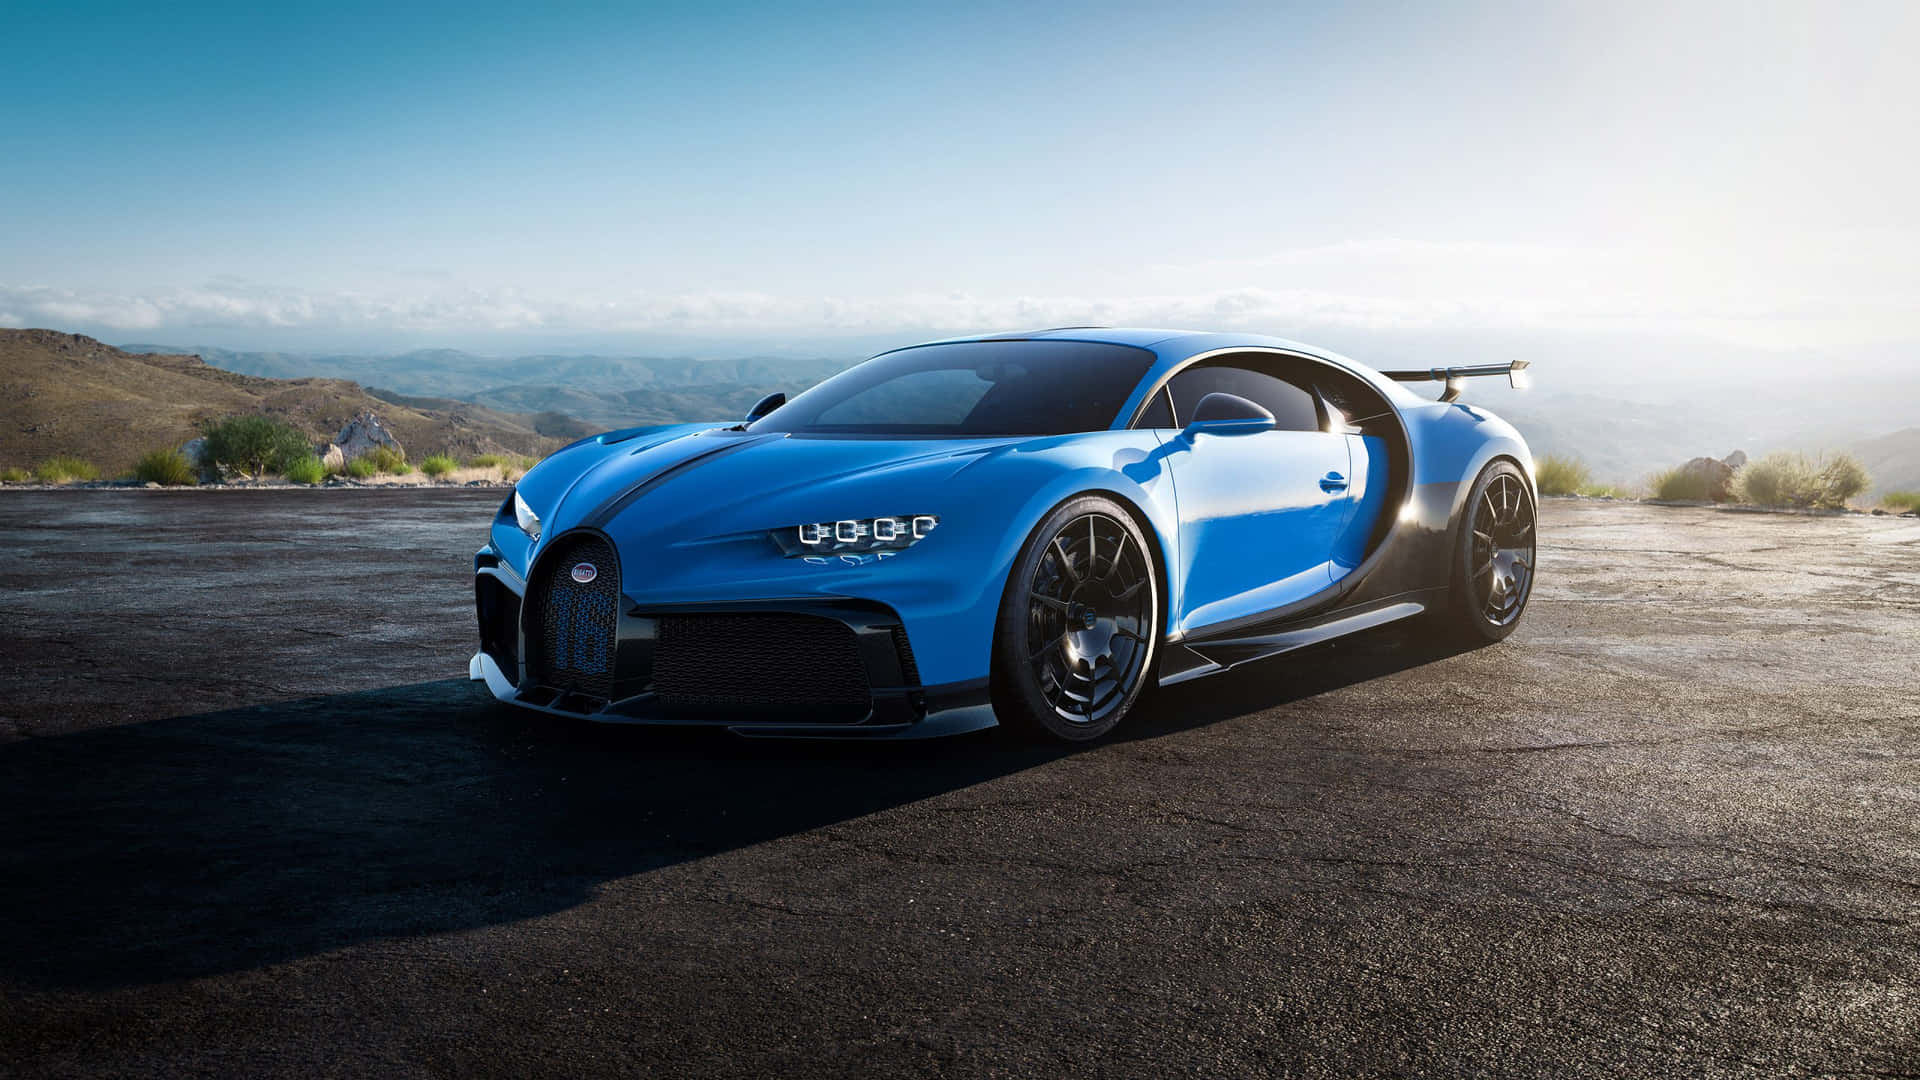 "feel The Power Of The Best Bugatti On The Road"